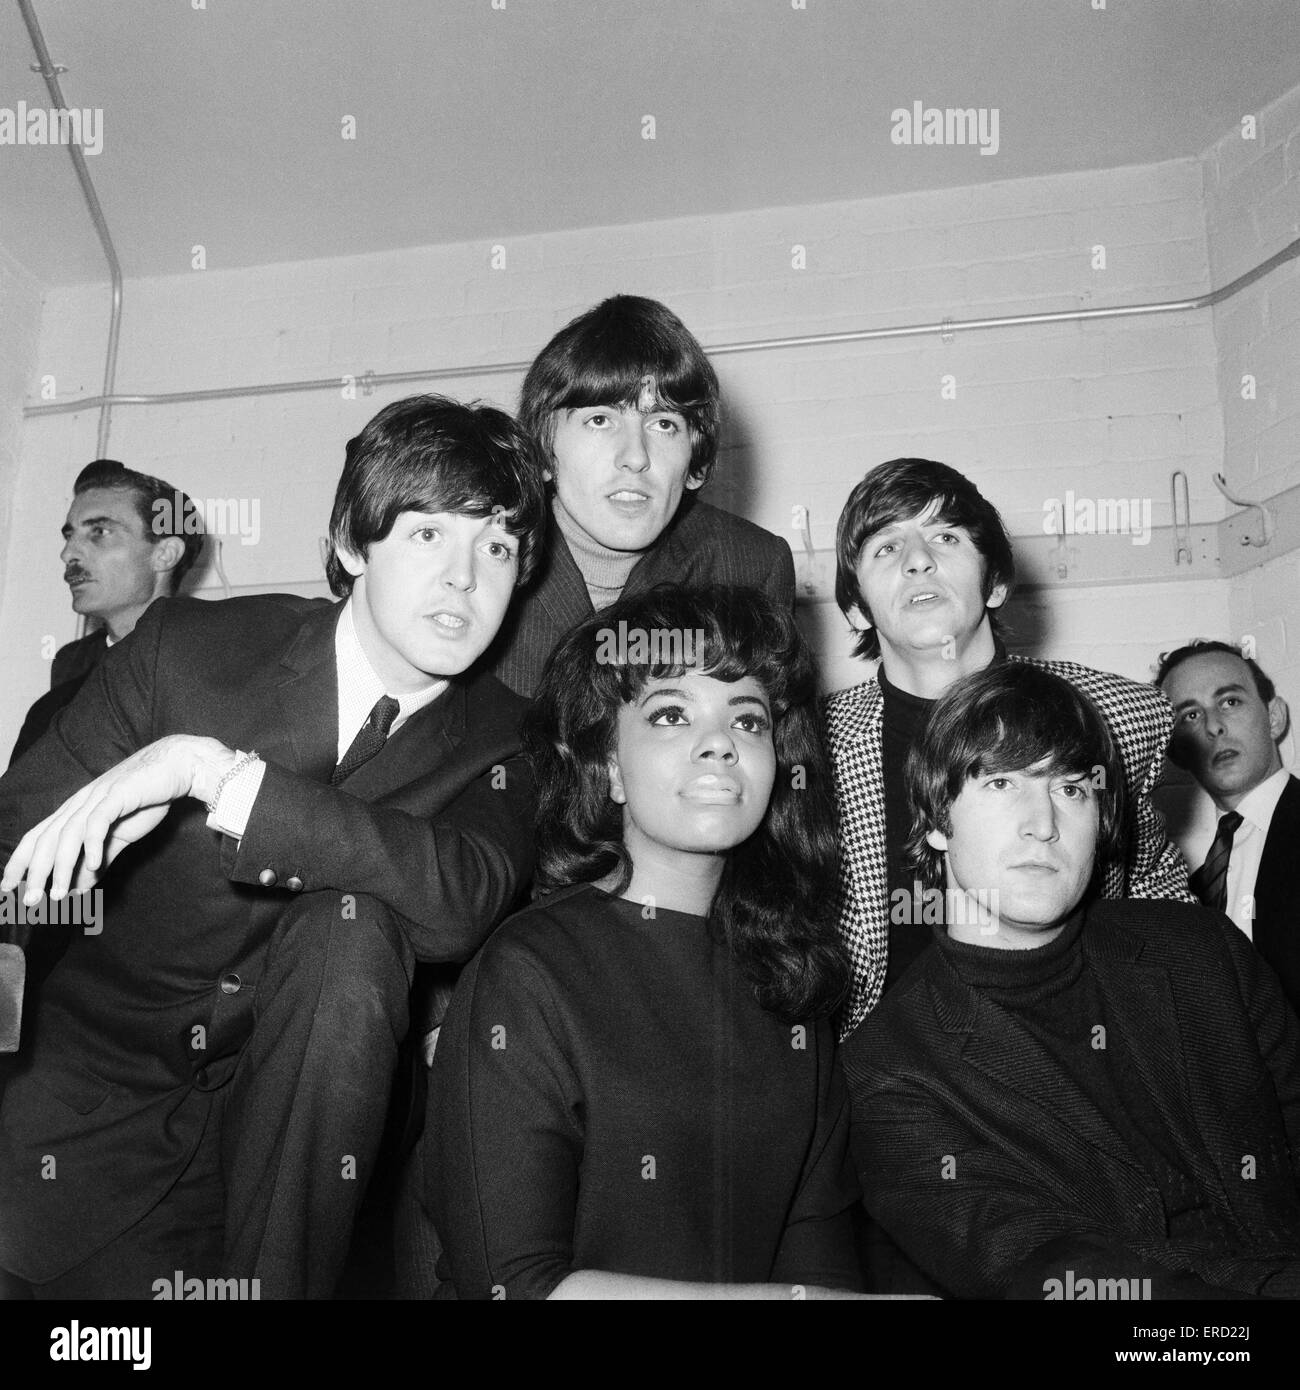 The Beatles with singer Mary Wells, ahead of the start of their UK tour with 18.15 and 20.40 performances at the Gaumont Theatre in Bradford, Friday 9th October 1964. Paul McCartney, George Harrison, Ringo Starr and John Lennon (not looking to happy). Stock Photo